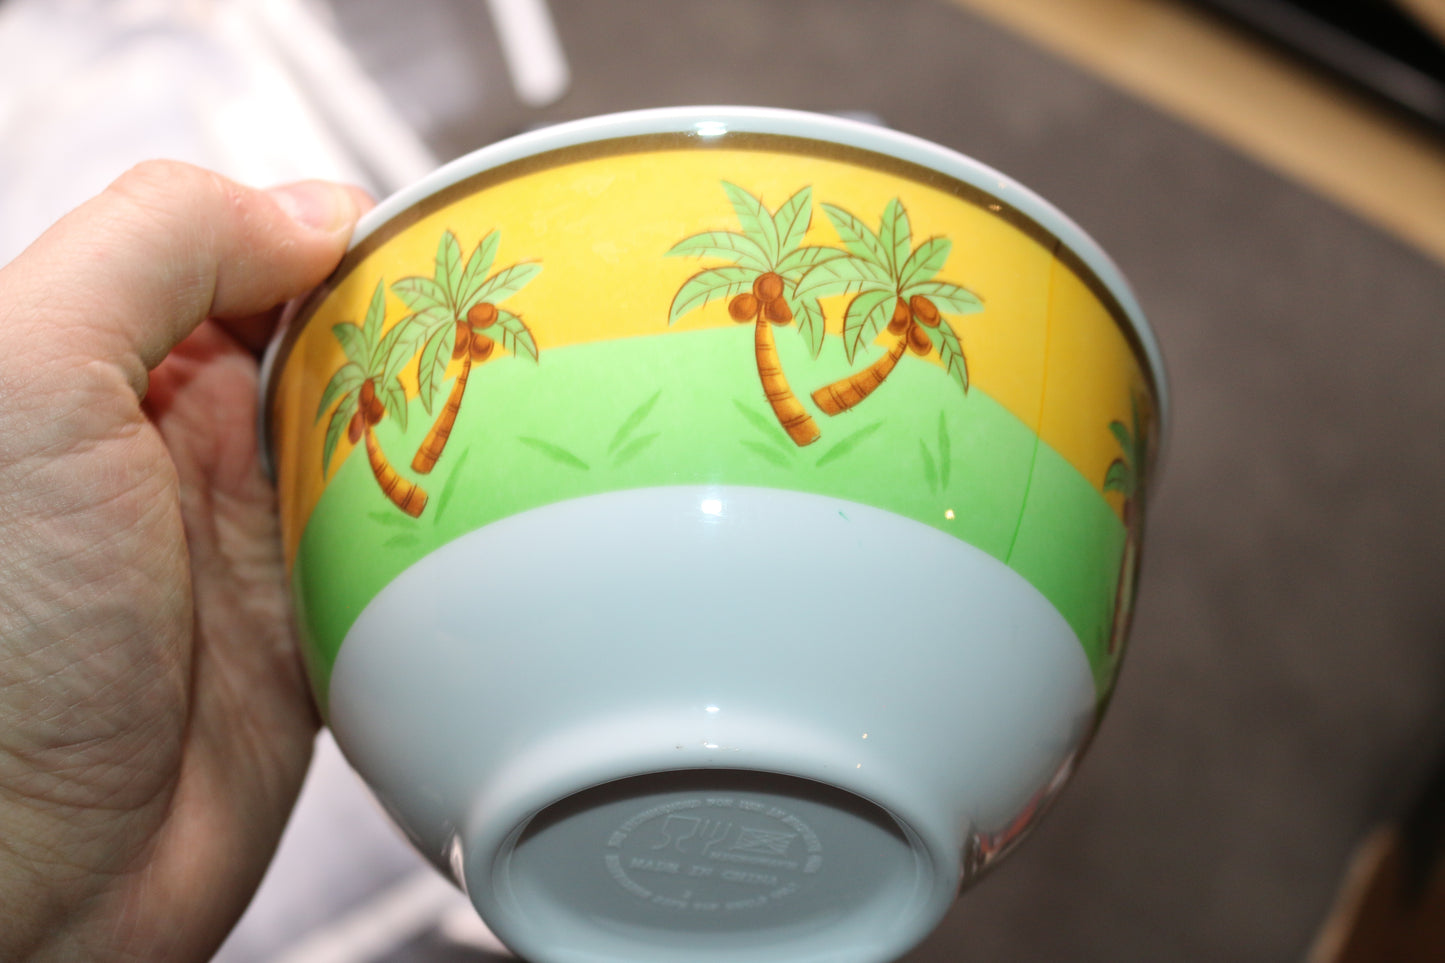 palm tree bowl microwave with a lot of spoons forks knifes plastics